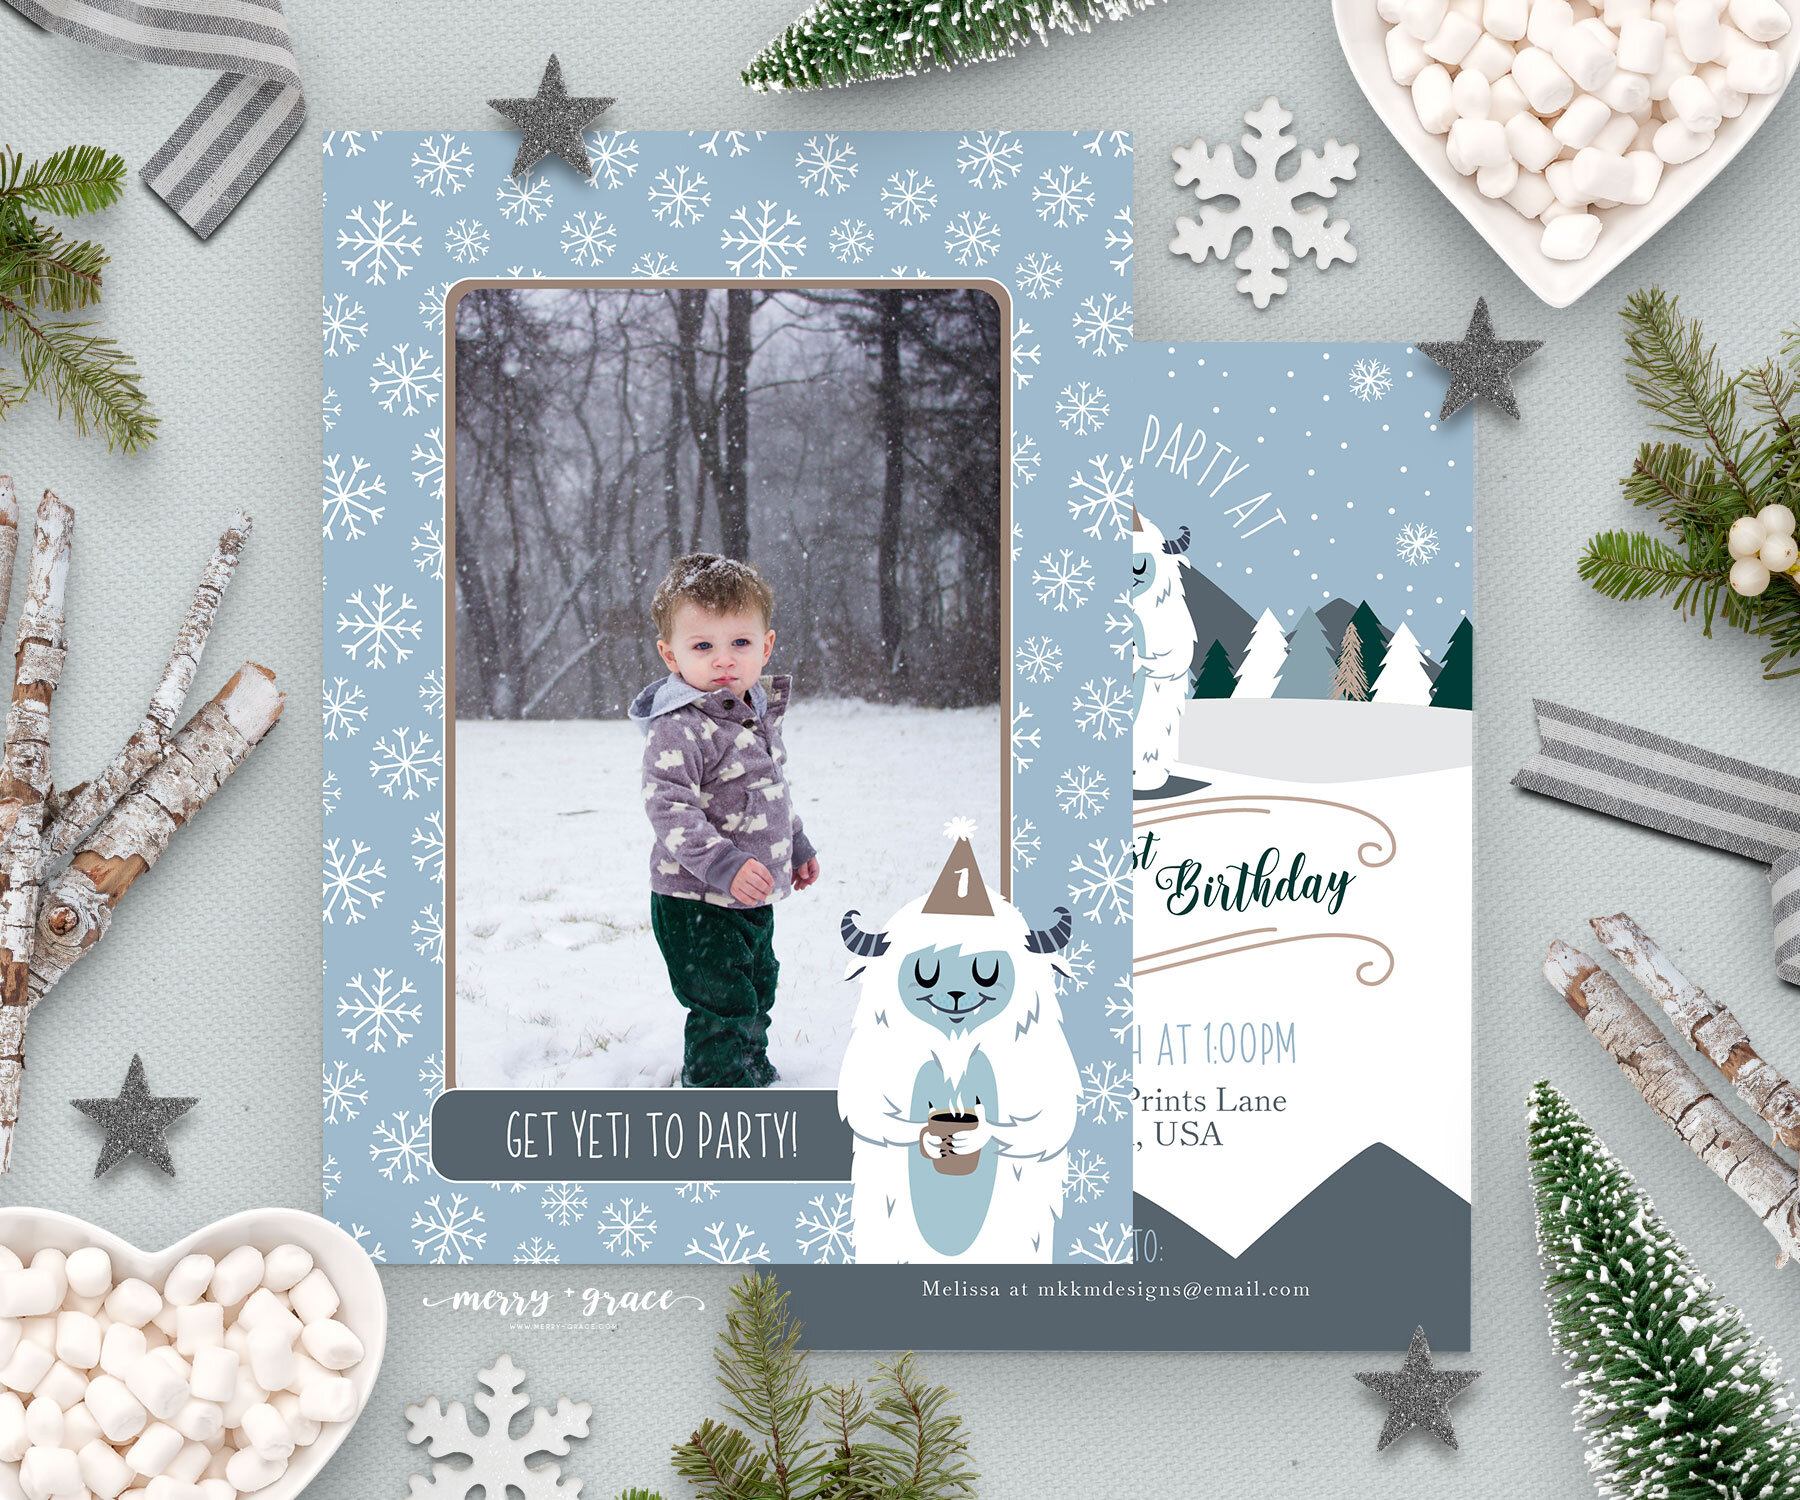 Yeti Birthday Invitation. Customize this invite with your own photo // merry and grace design co.